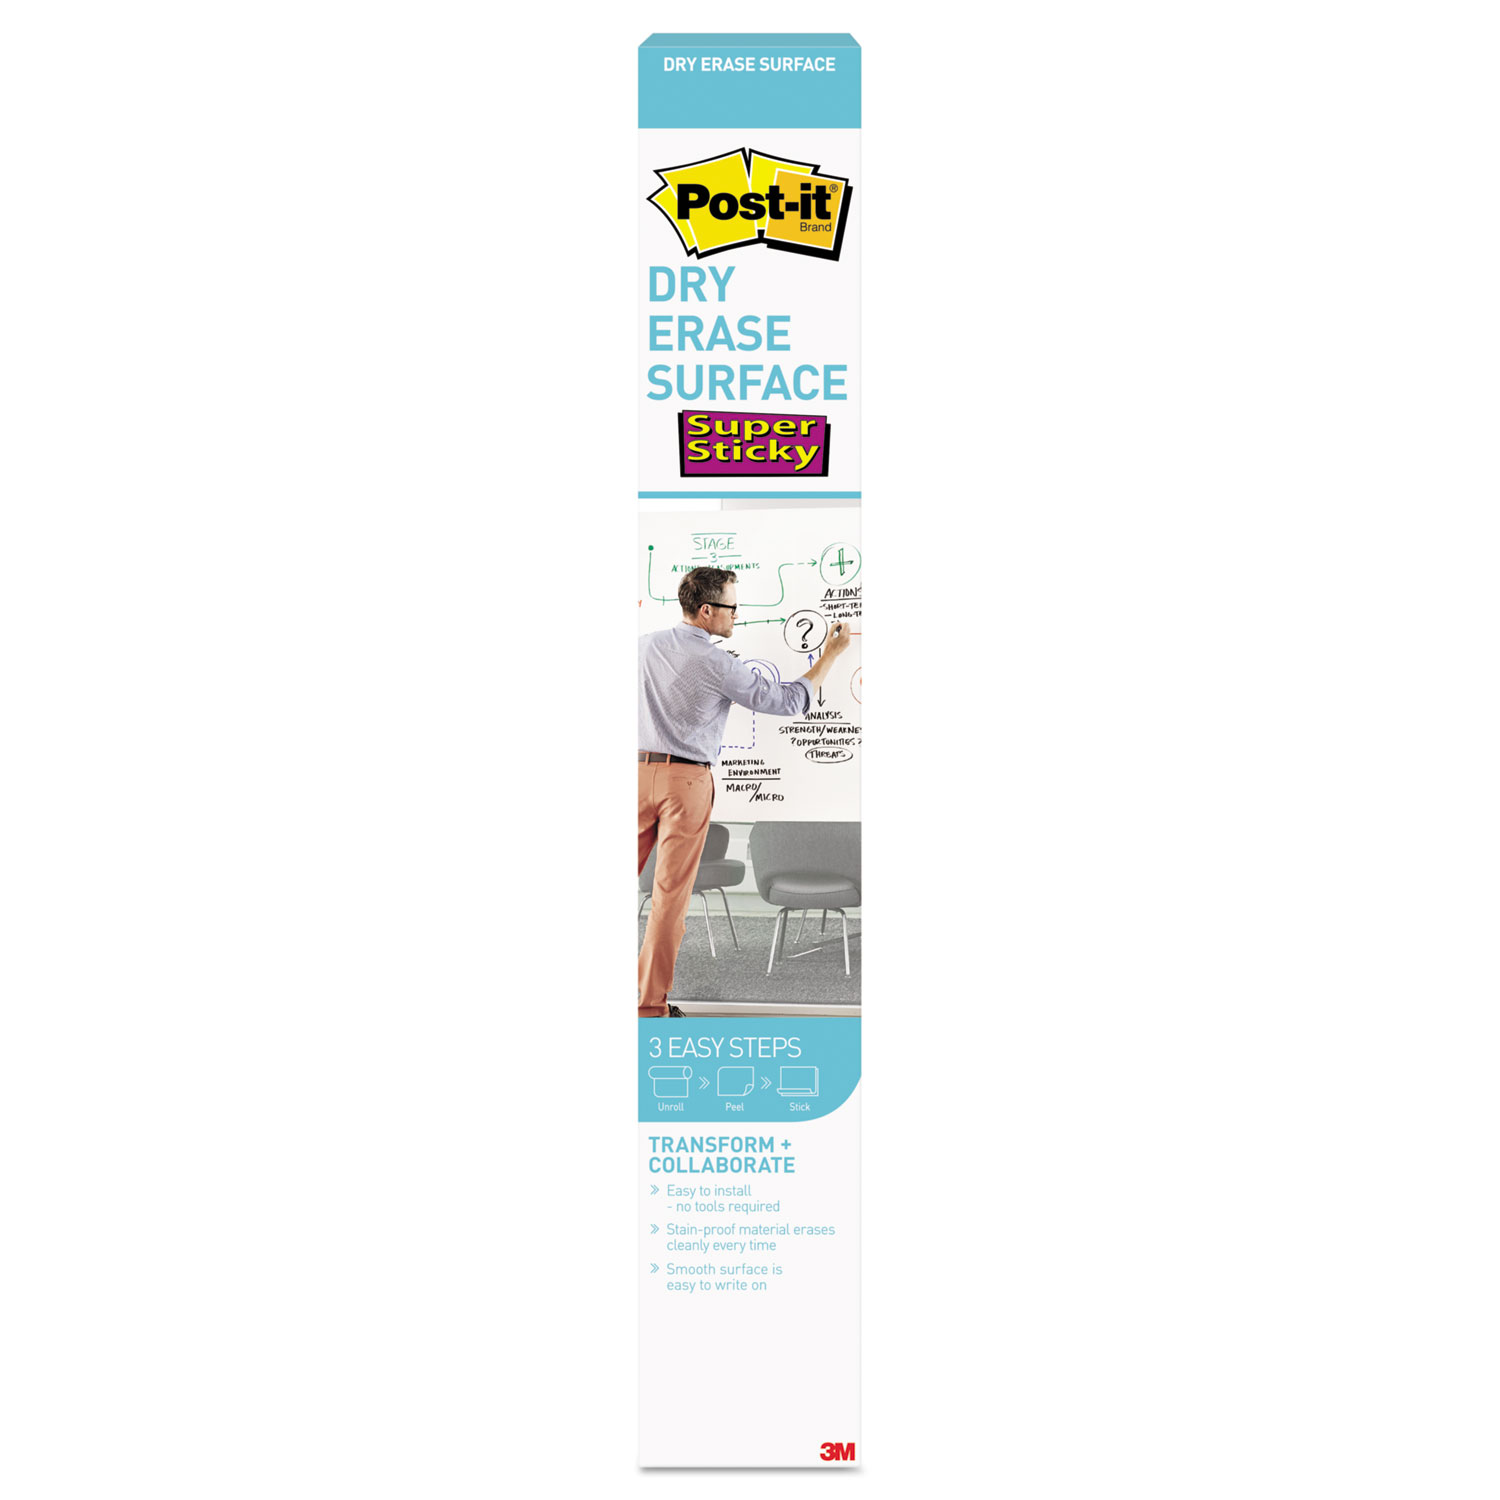 Dry Erase Surface with Adhesive Backing, 36 x 24, White